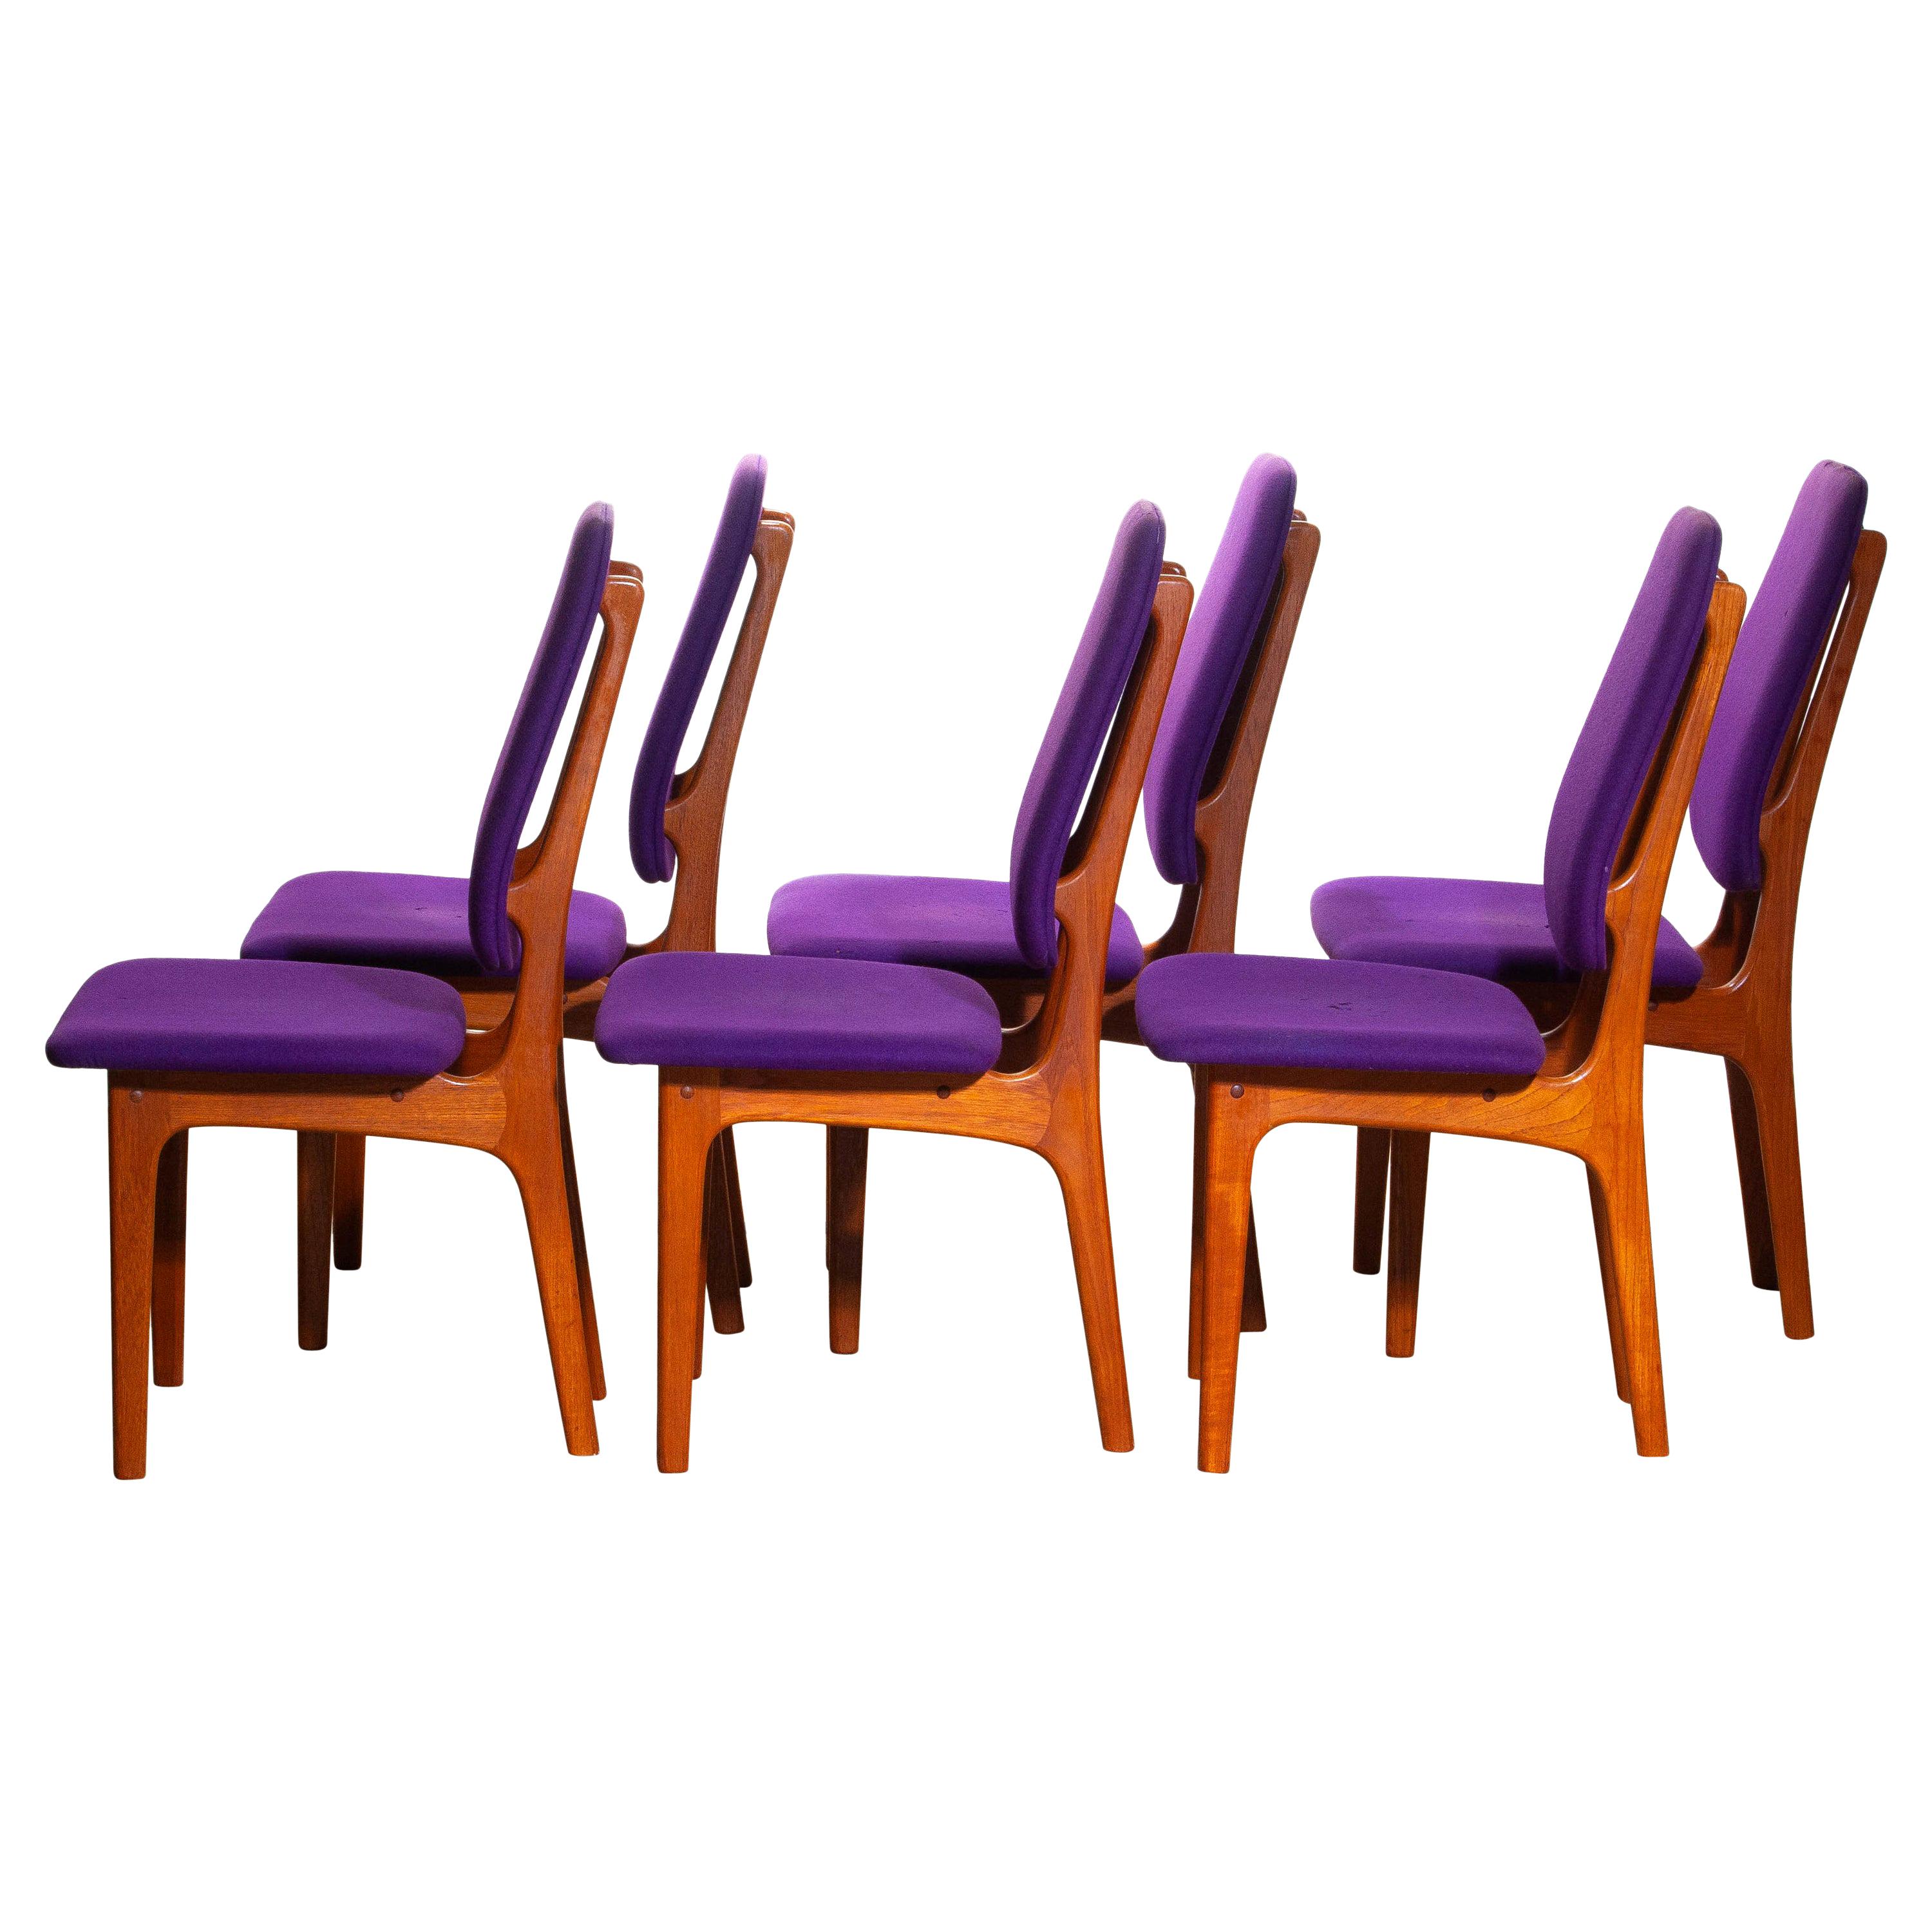 Rare set of six dining chairs from the 1960s in teak designed by Erik Buch for O.D. Møbler A.S., Denmark.
Beautiful aspects are the slim and high back rests.
Chairs are marked 